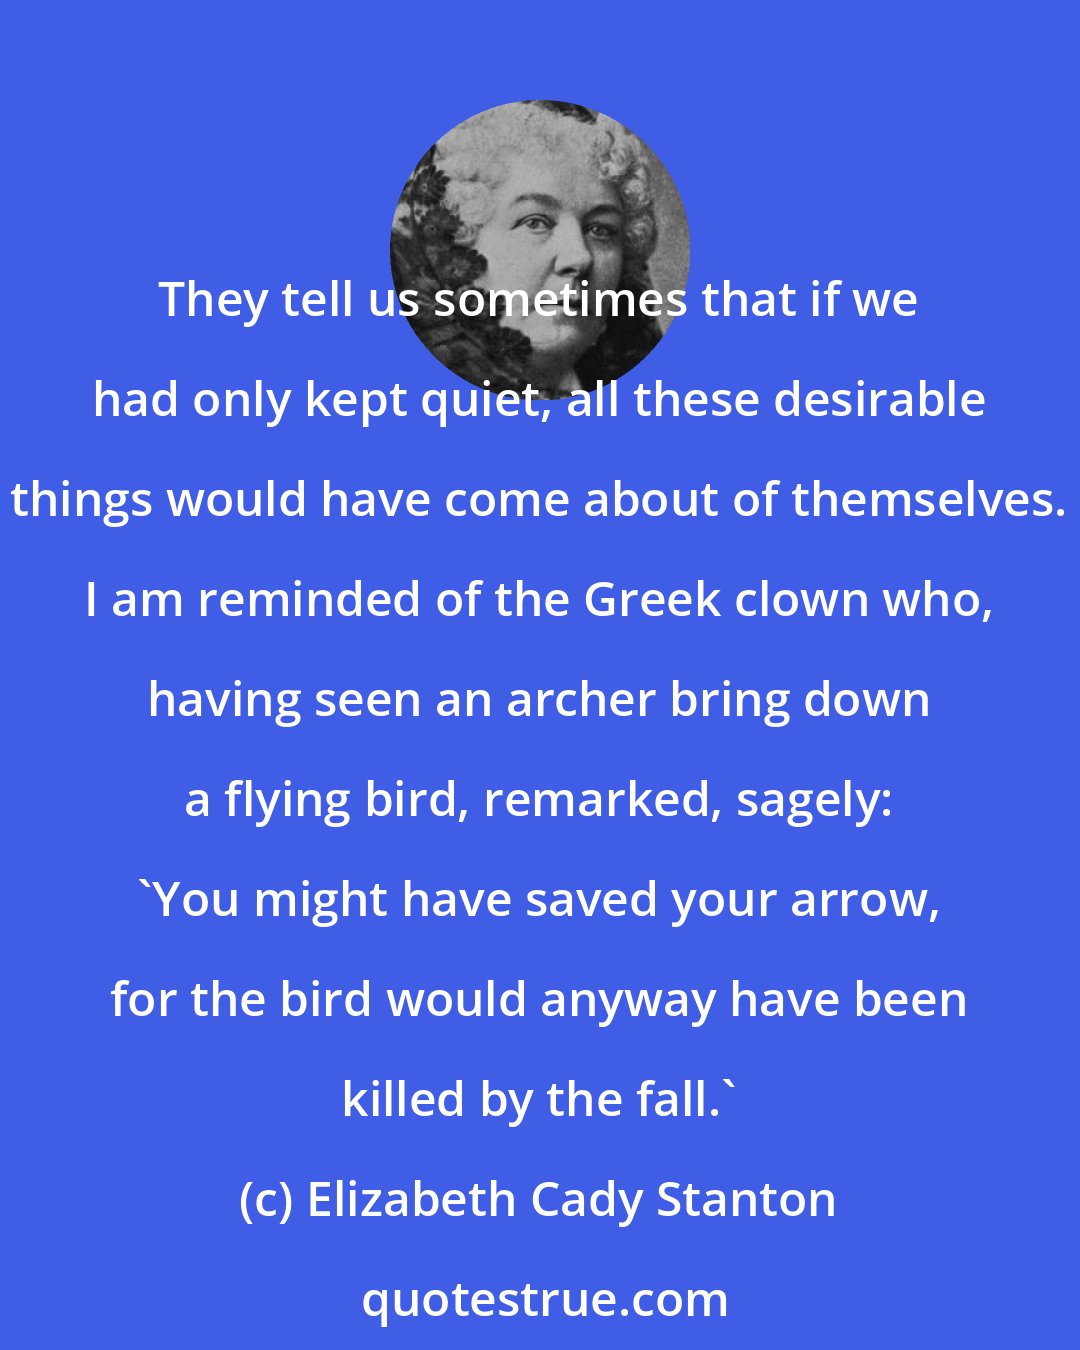 Elizabeth Cady Stanton: They tell us sometimes that if we had only kept quiet, all these desirable things would have come about of themselves. I am reminded of the Greek clown who, having seen an archer bring down a flying bird, remarked, sagely: 'You might have saved your arrow, for the bird would anyway have been killed by the fall.'